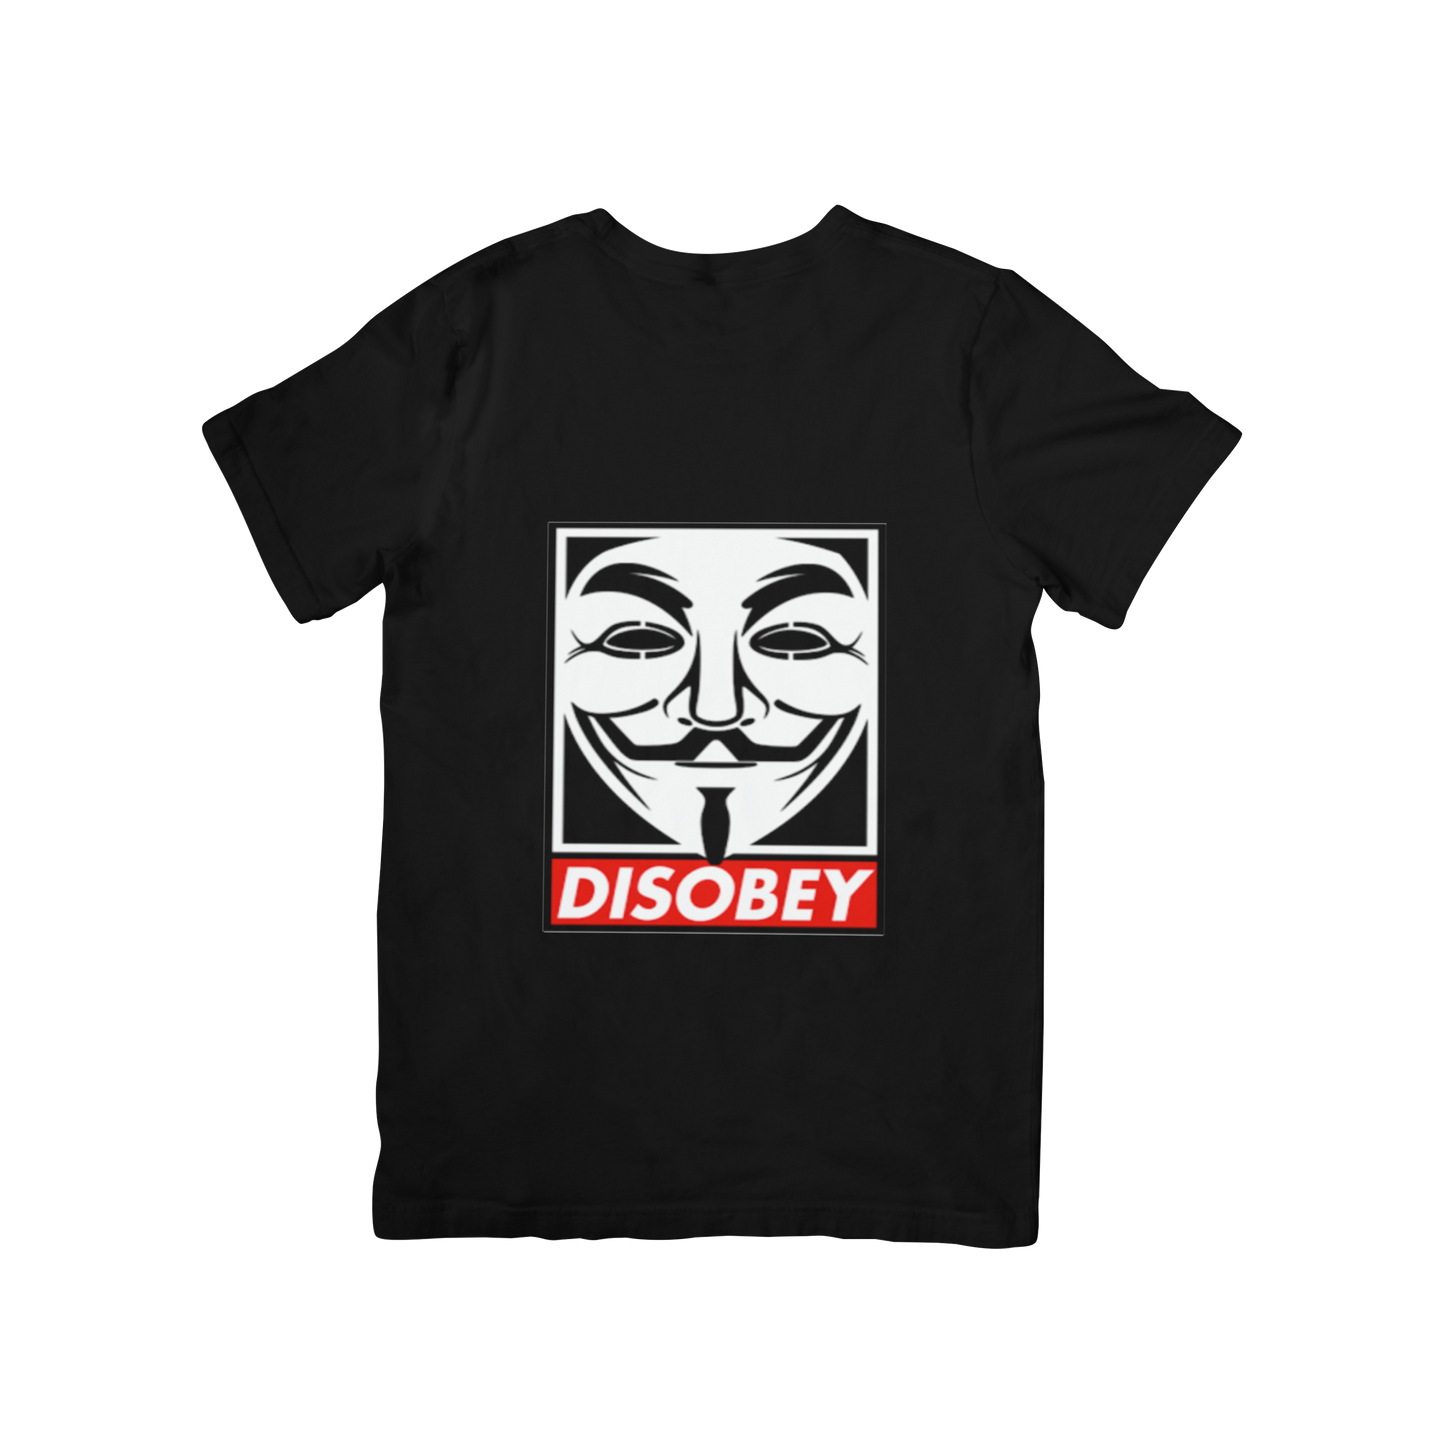 Disobey Design T-shirt